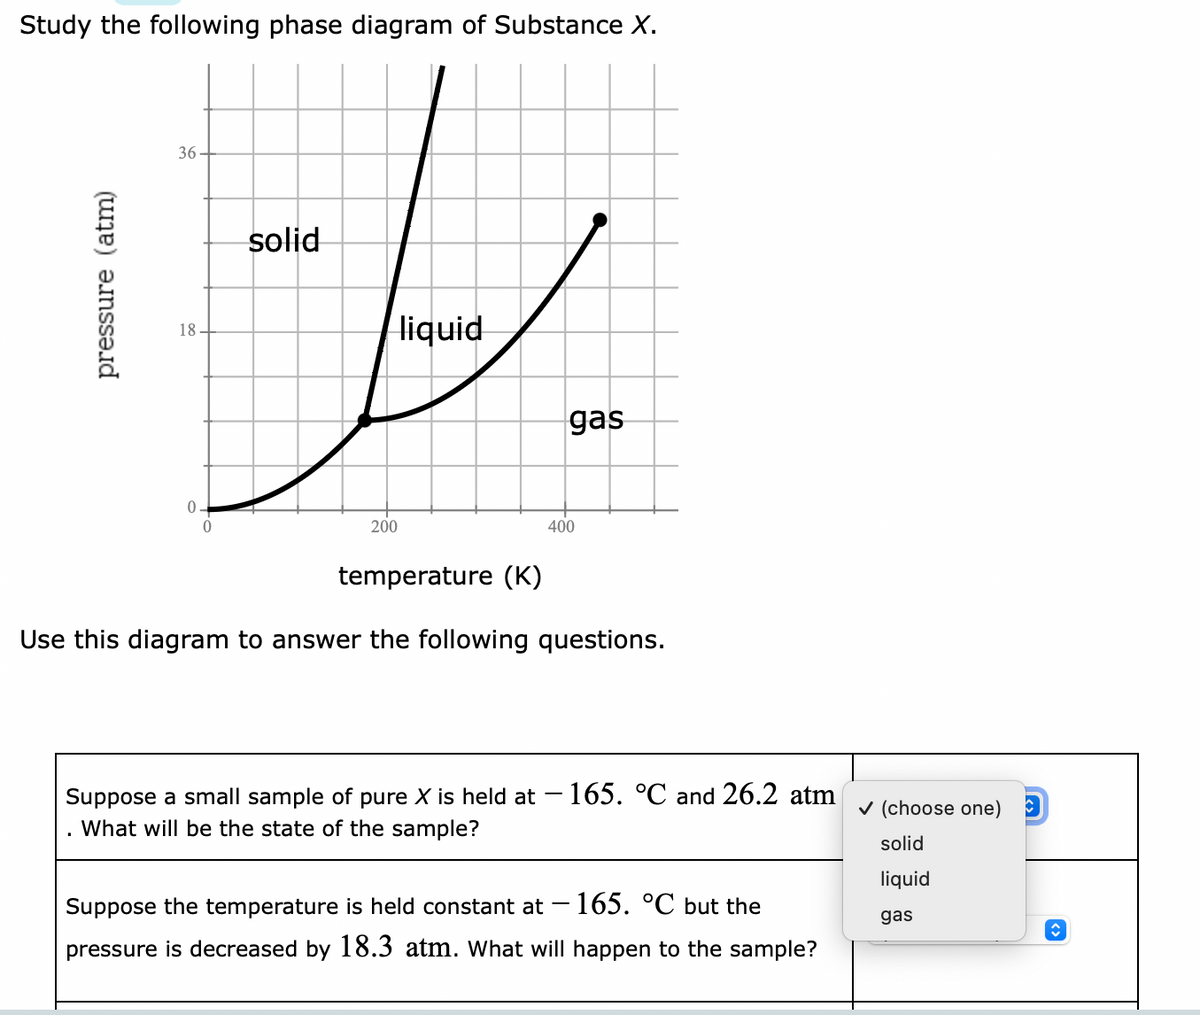 Study the following phase diagram of Substance X.
pressure (atm)
36
18
0.
0
solid
liquid
200
gas
400
temperature (K)
Use this diagram to answer the following questions.
Suppose a small sample of pure X is held at - 165. °C and 26.2 atm
What will be the state of the sample?
Suppose the temperature is held constant at -165. °C but the
pressure is decreased by 18.3 atm. What will happen to the sample?
✓ (choose one) C
solid
liquid
gas
î